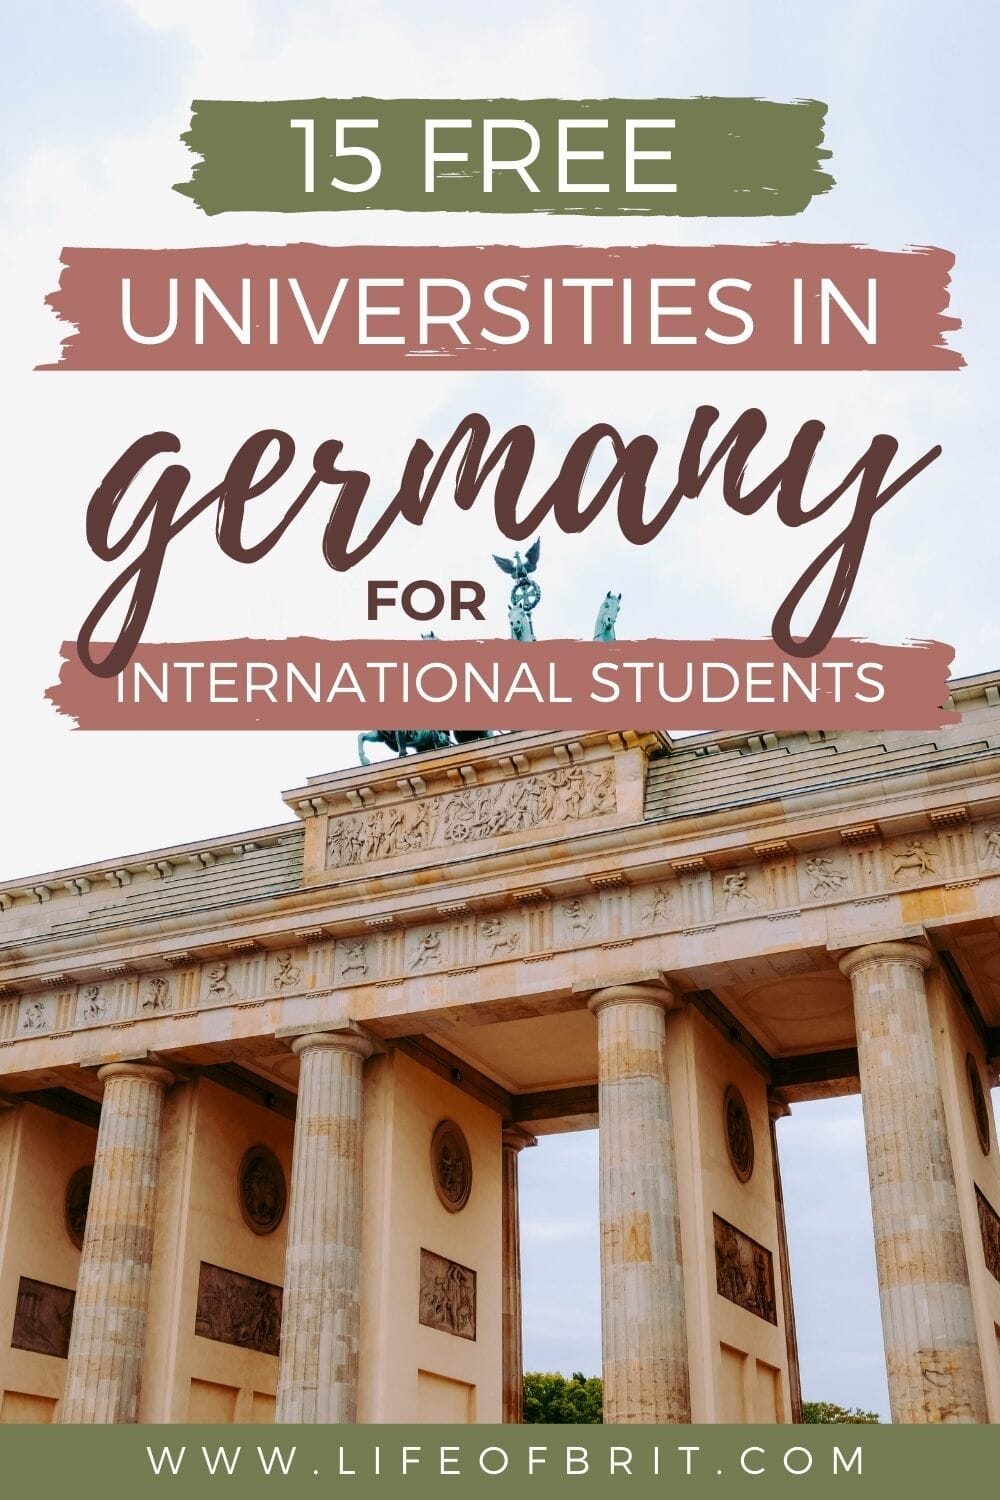 15 Free Universities in Germany for International Students - life of brit